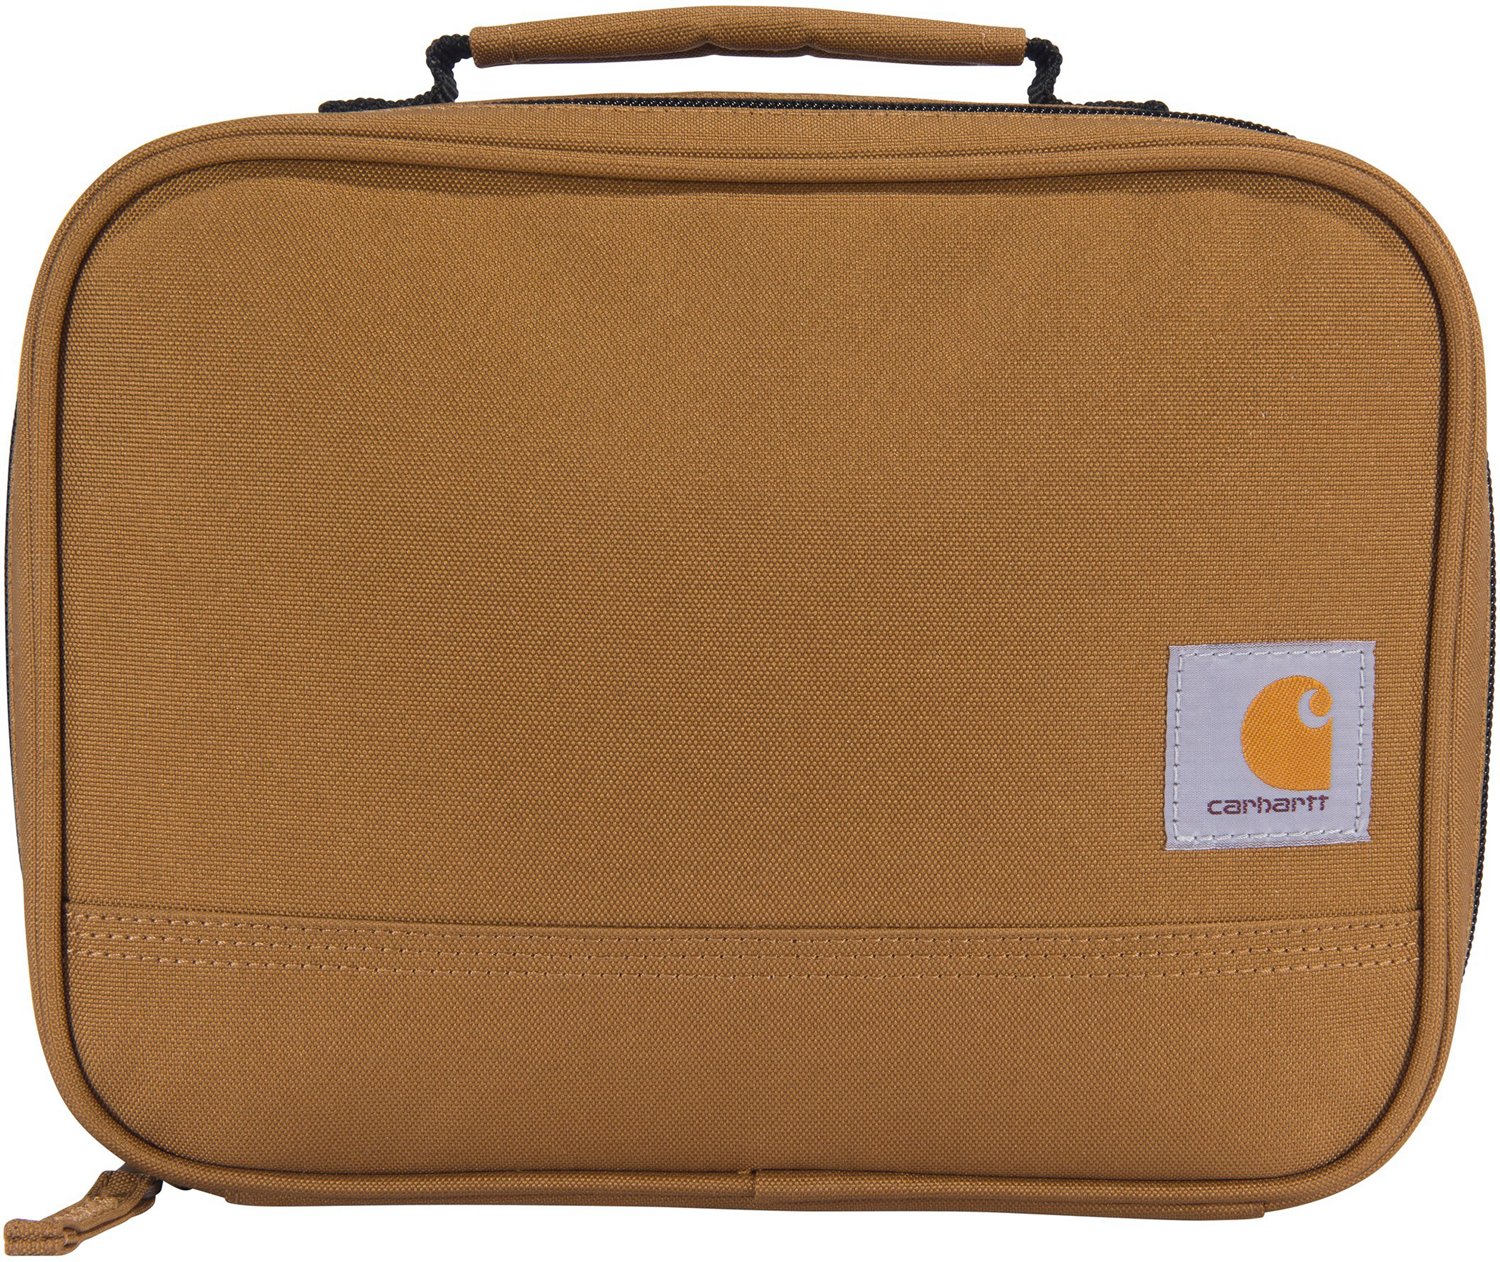 Carhartt Insulated 4 Can Lunch Cooler | Academy